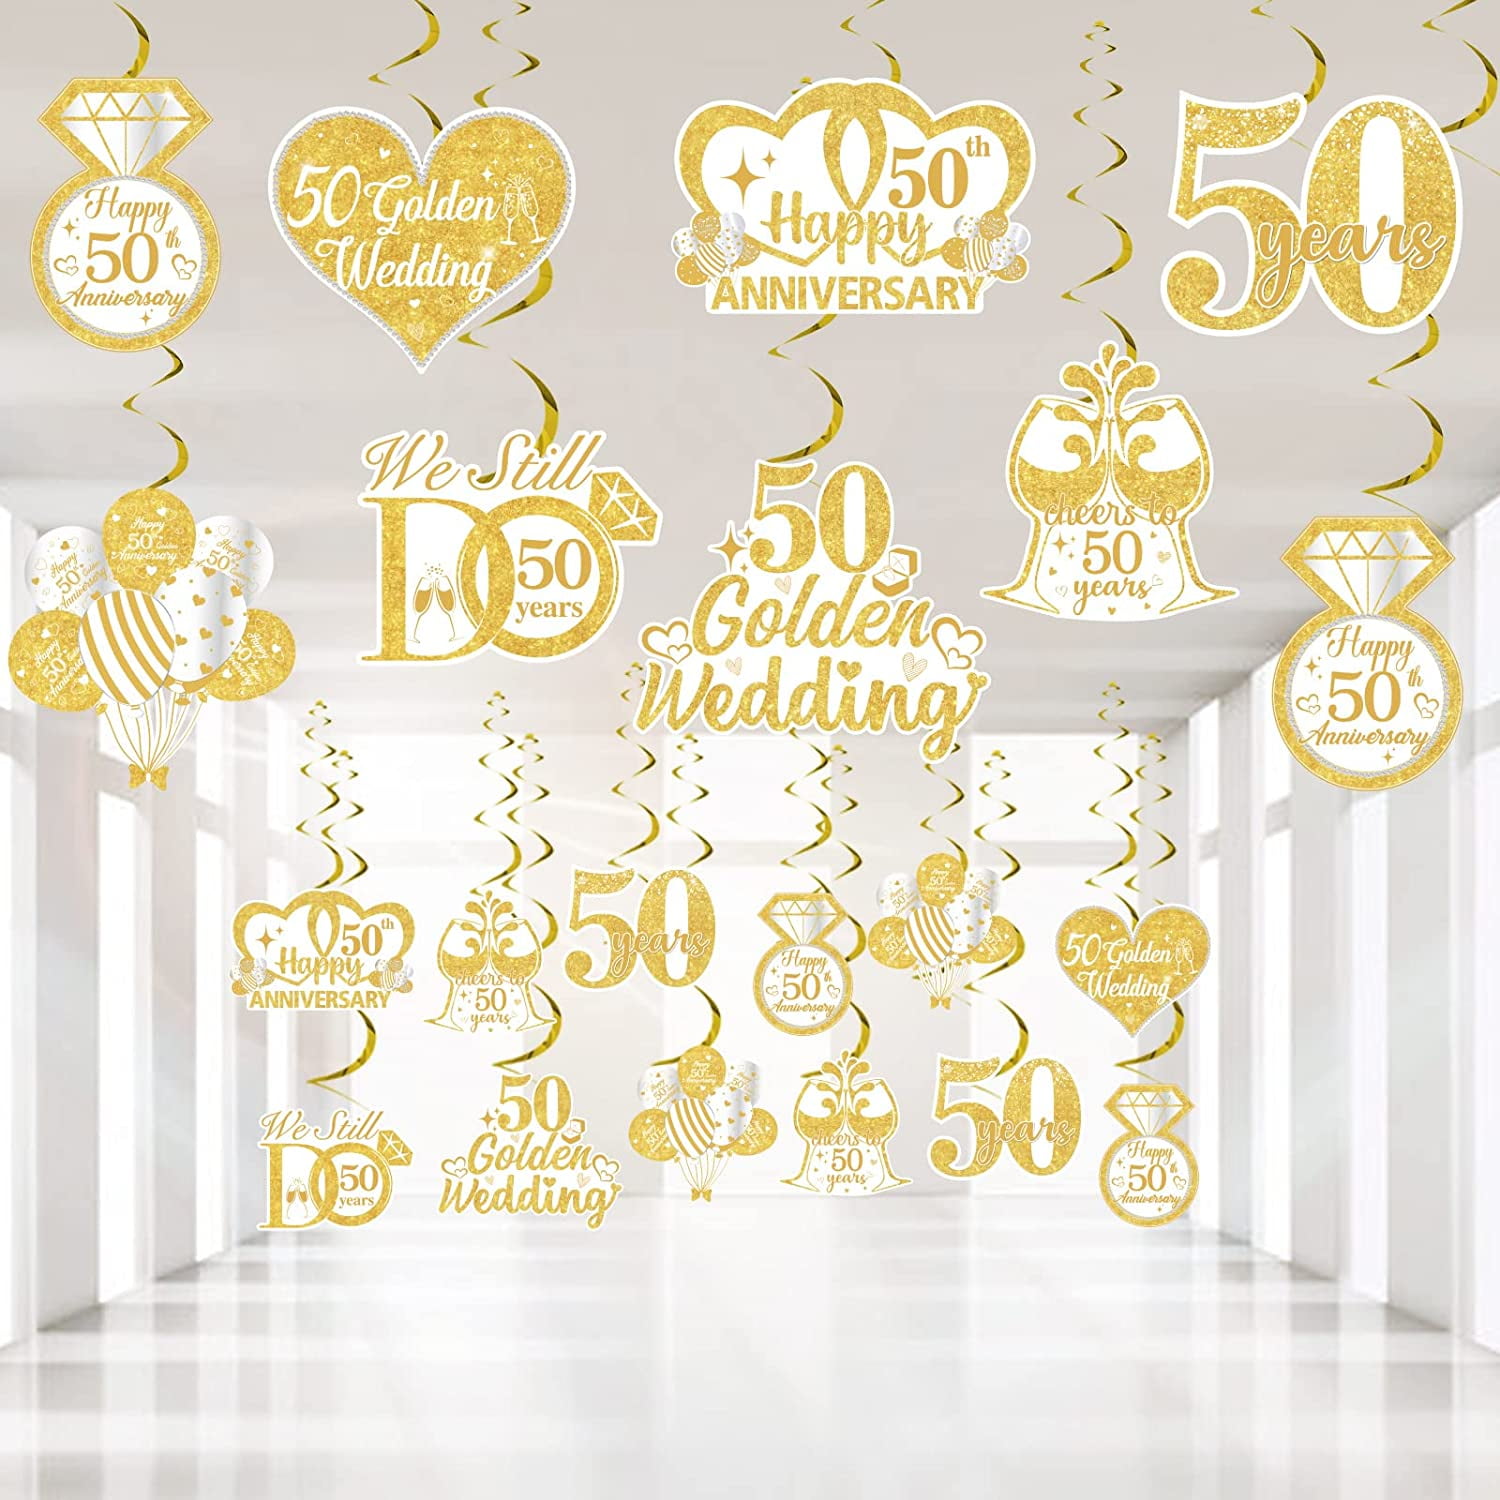 24 Pieces 50th Anniversary Hanging Swirls Decorations, 50th Golden ...